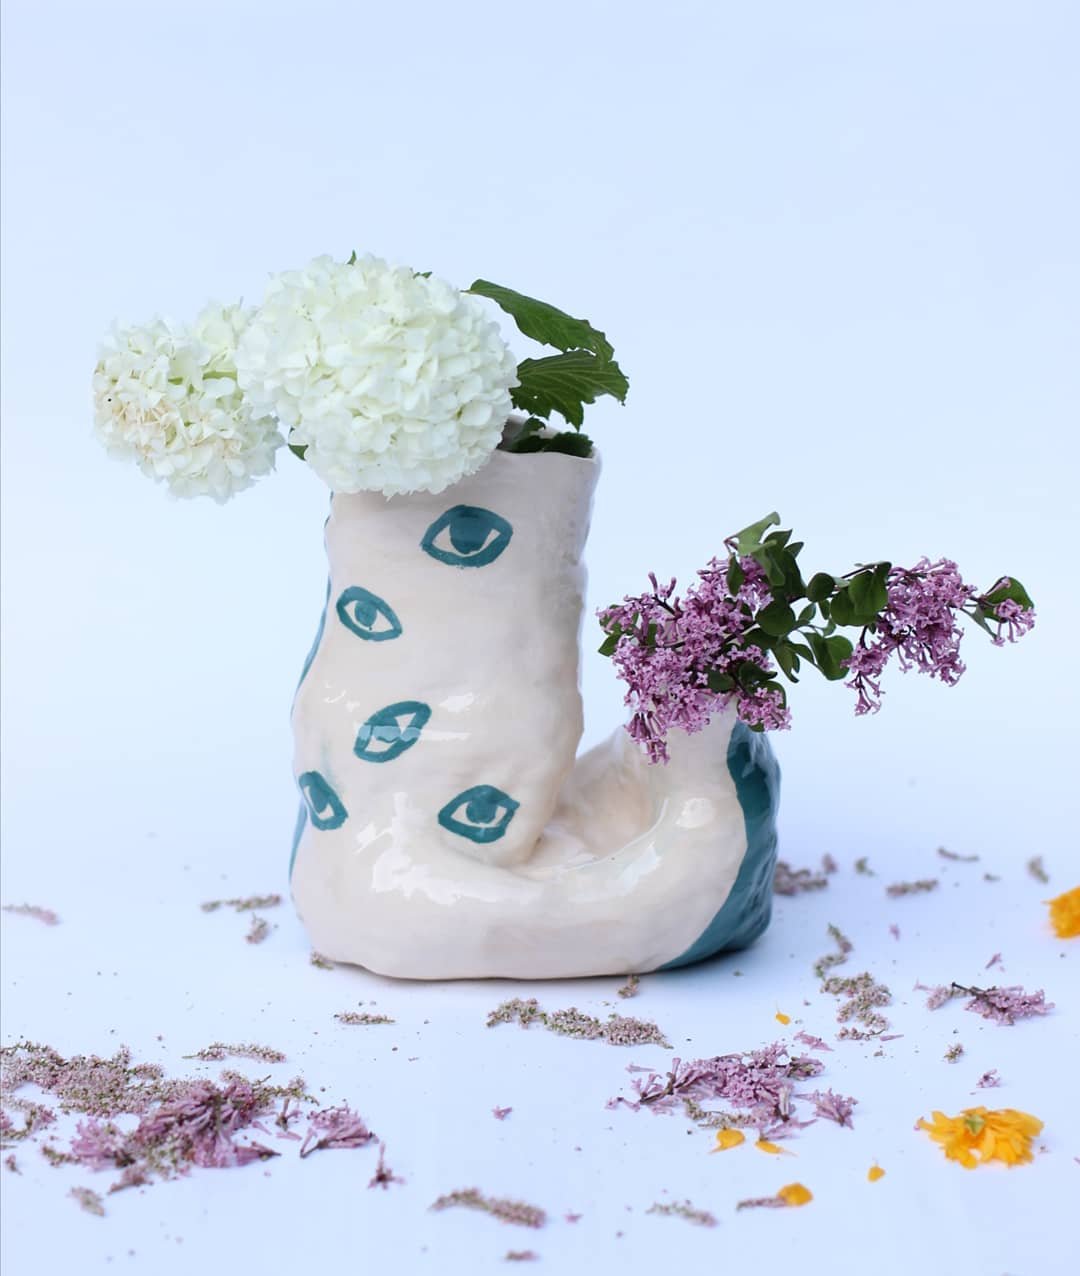 Lively ceramics for a gloomy day | TOP 5